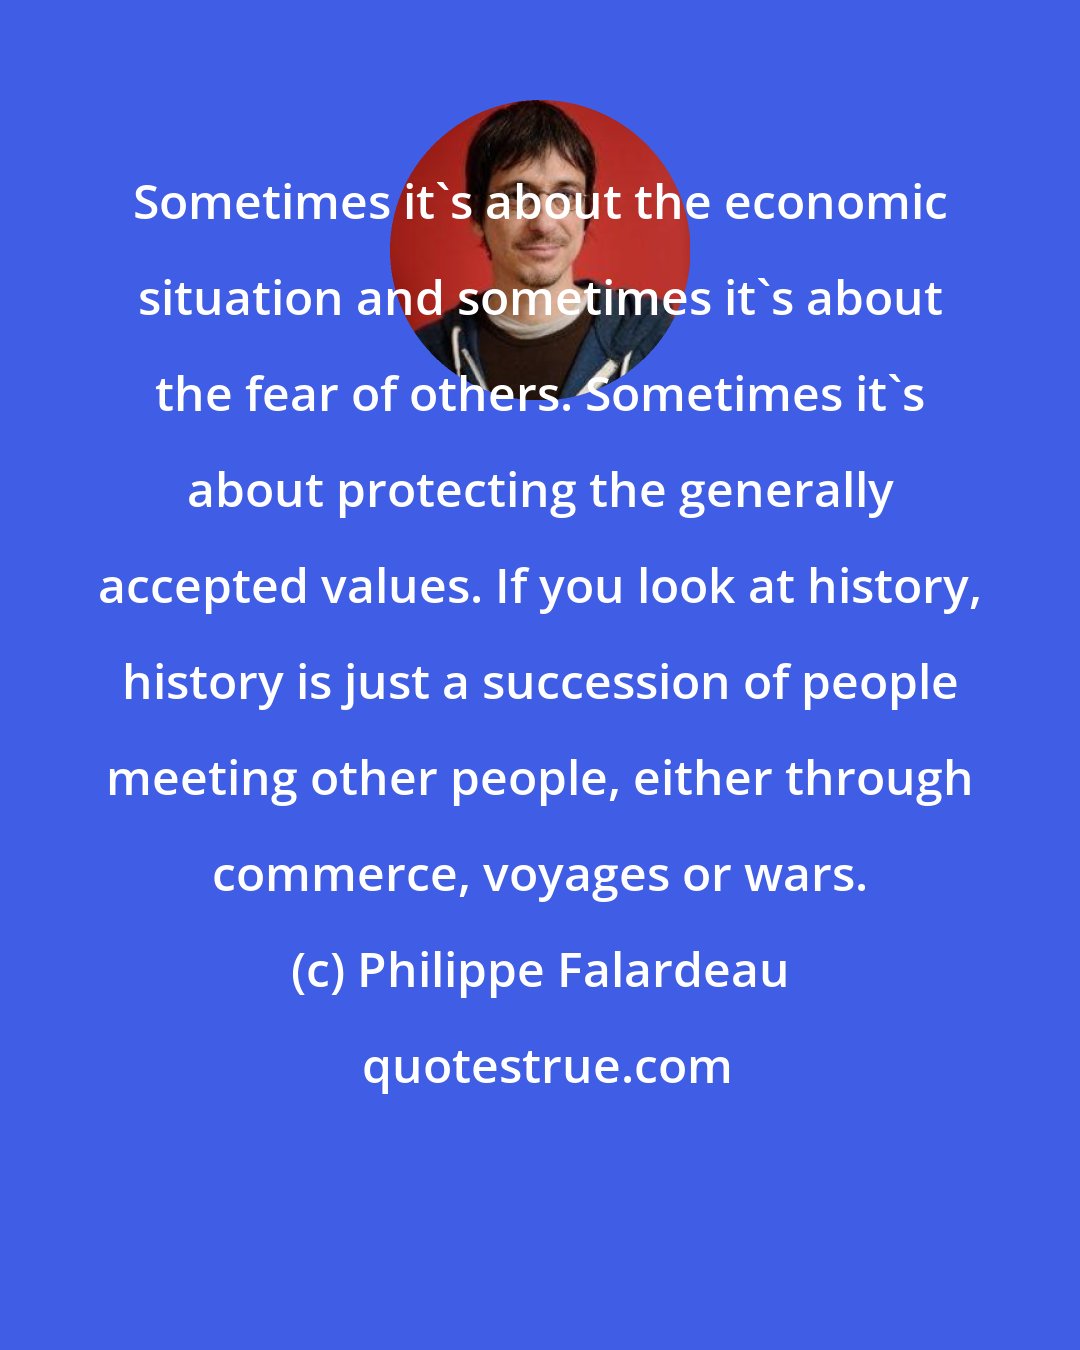 Philippe Falardeau: Sometimes it's about the economic situation and sometimes it's about the fear of others. Sometimes it's about protecting the generally accepted values. If you look at history, history is just a succession of people meeting other people, either through commerce, voyages or wars.